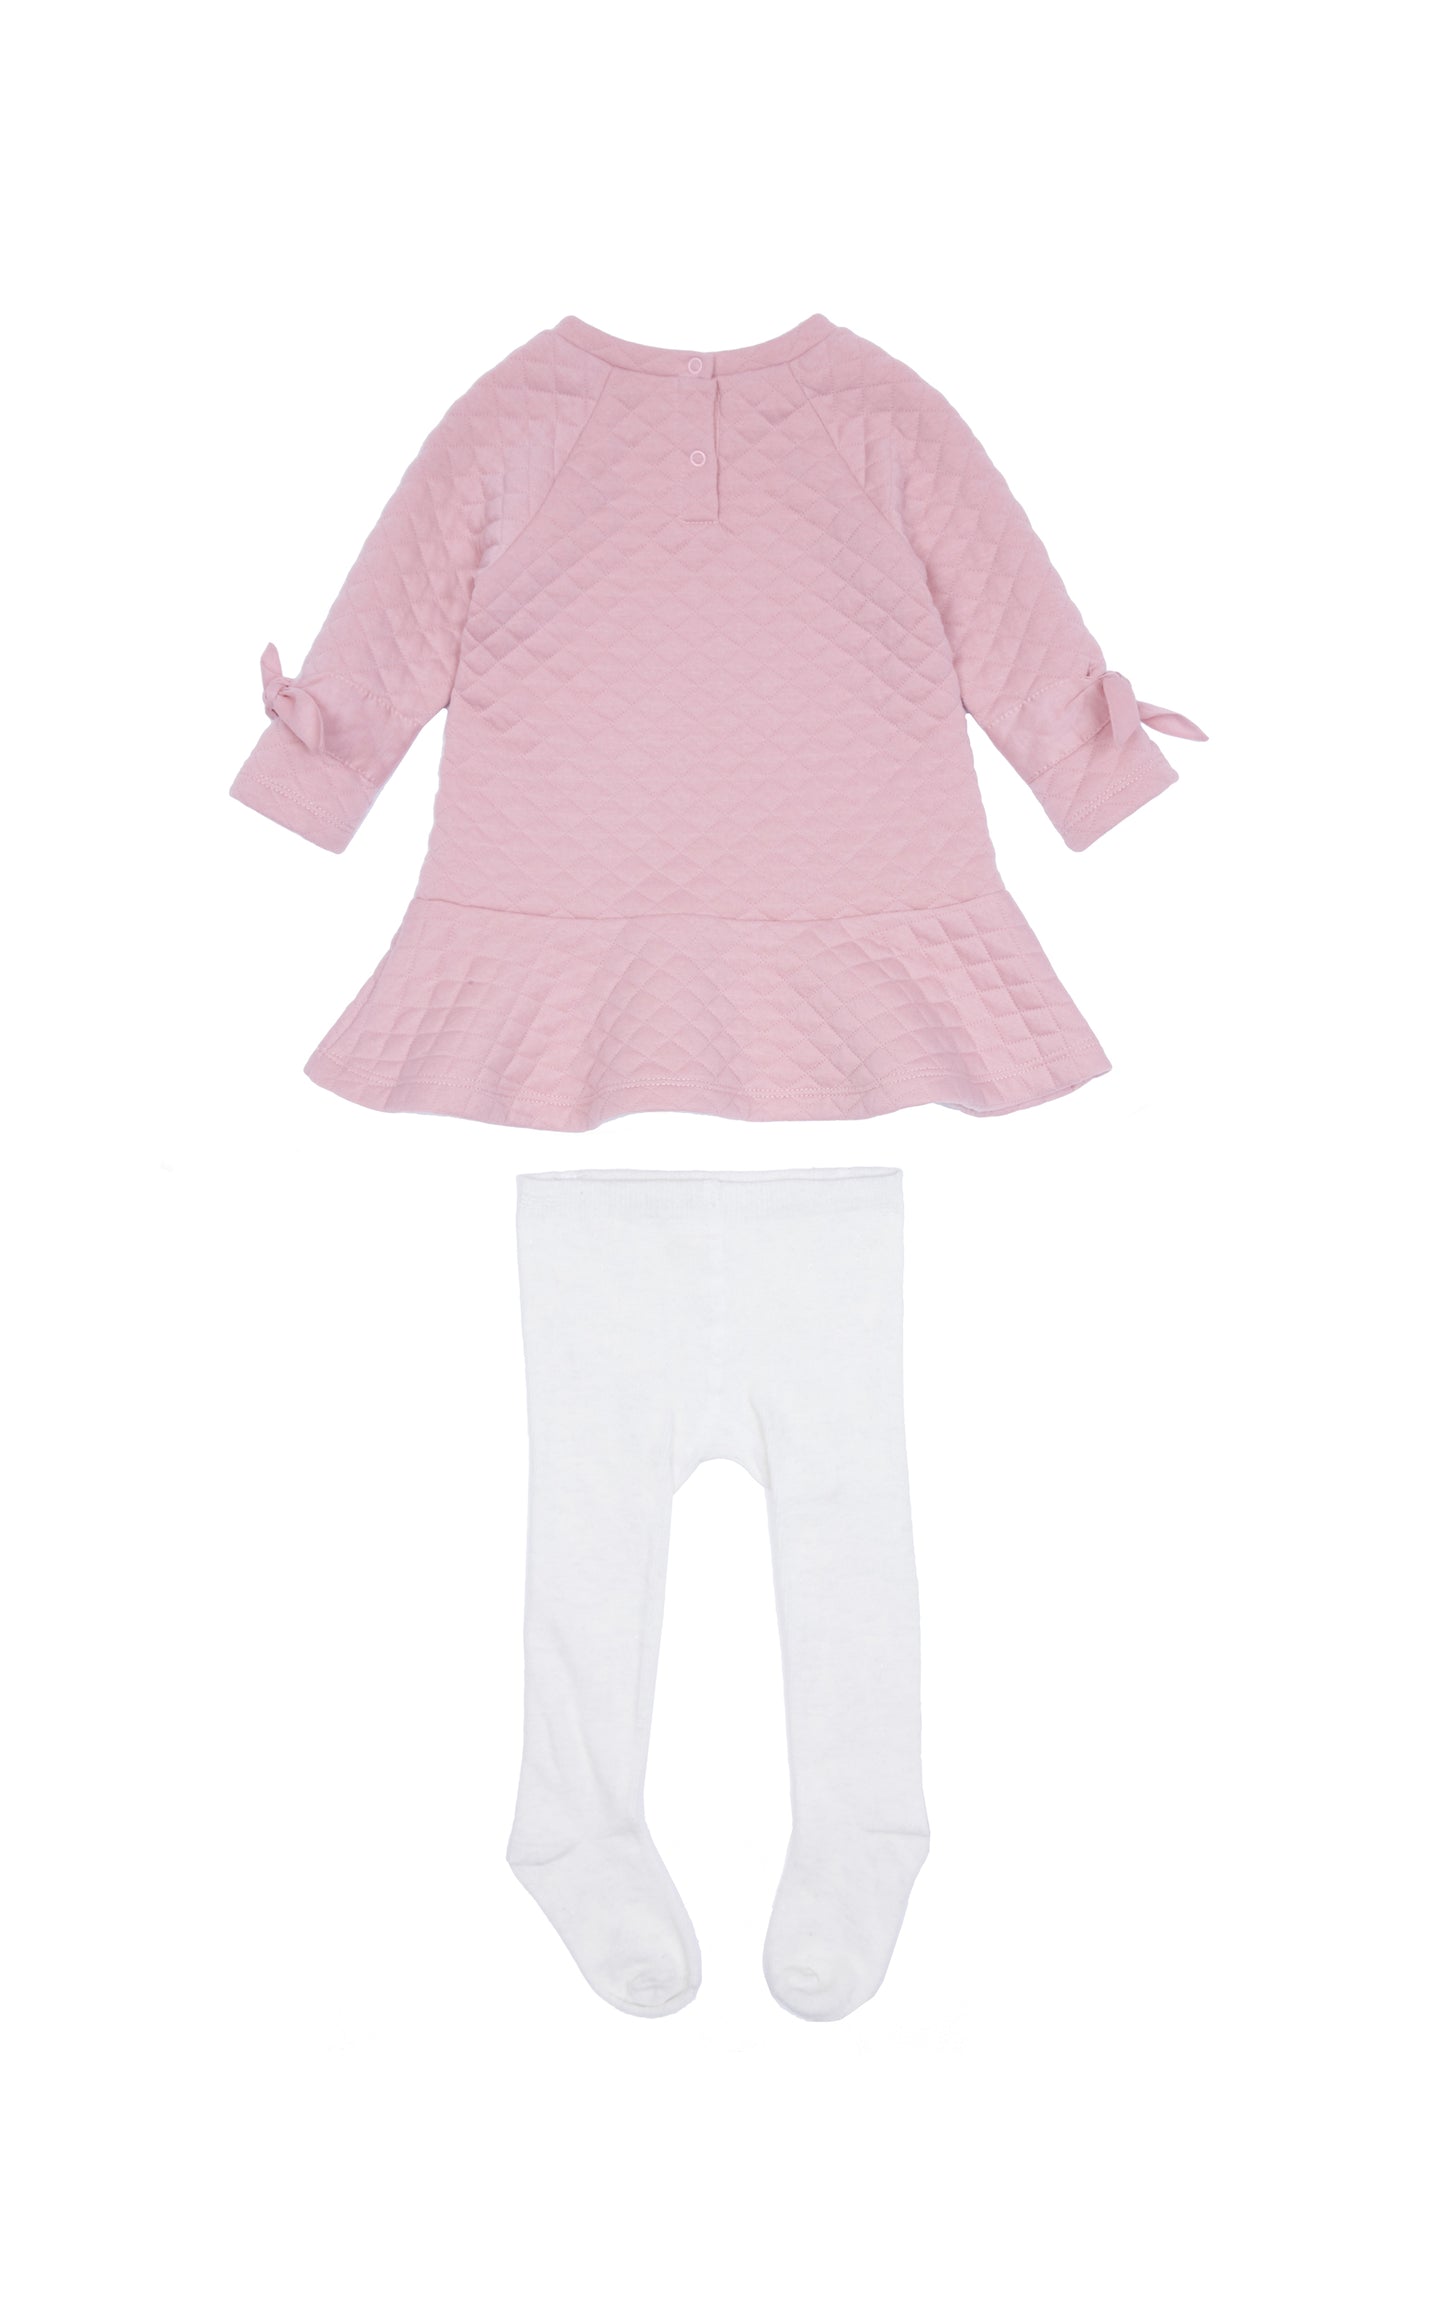 Back view of long-sleeve pink dress with quilted texture and bows on sleeves with white tights.